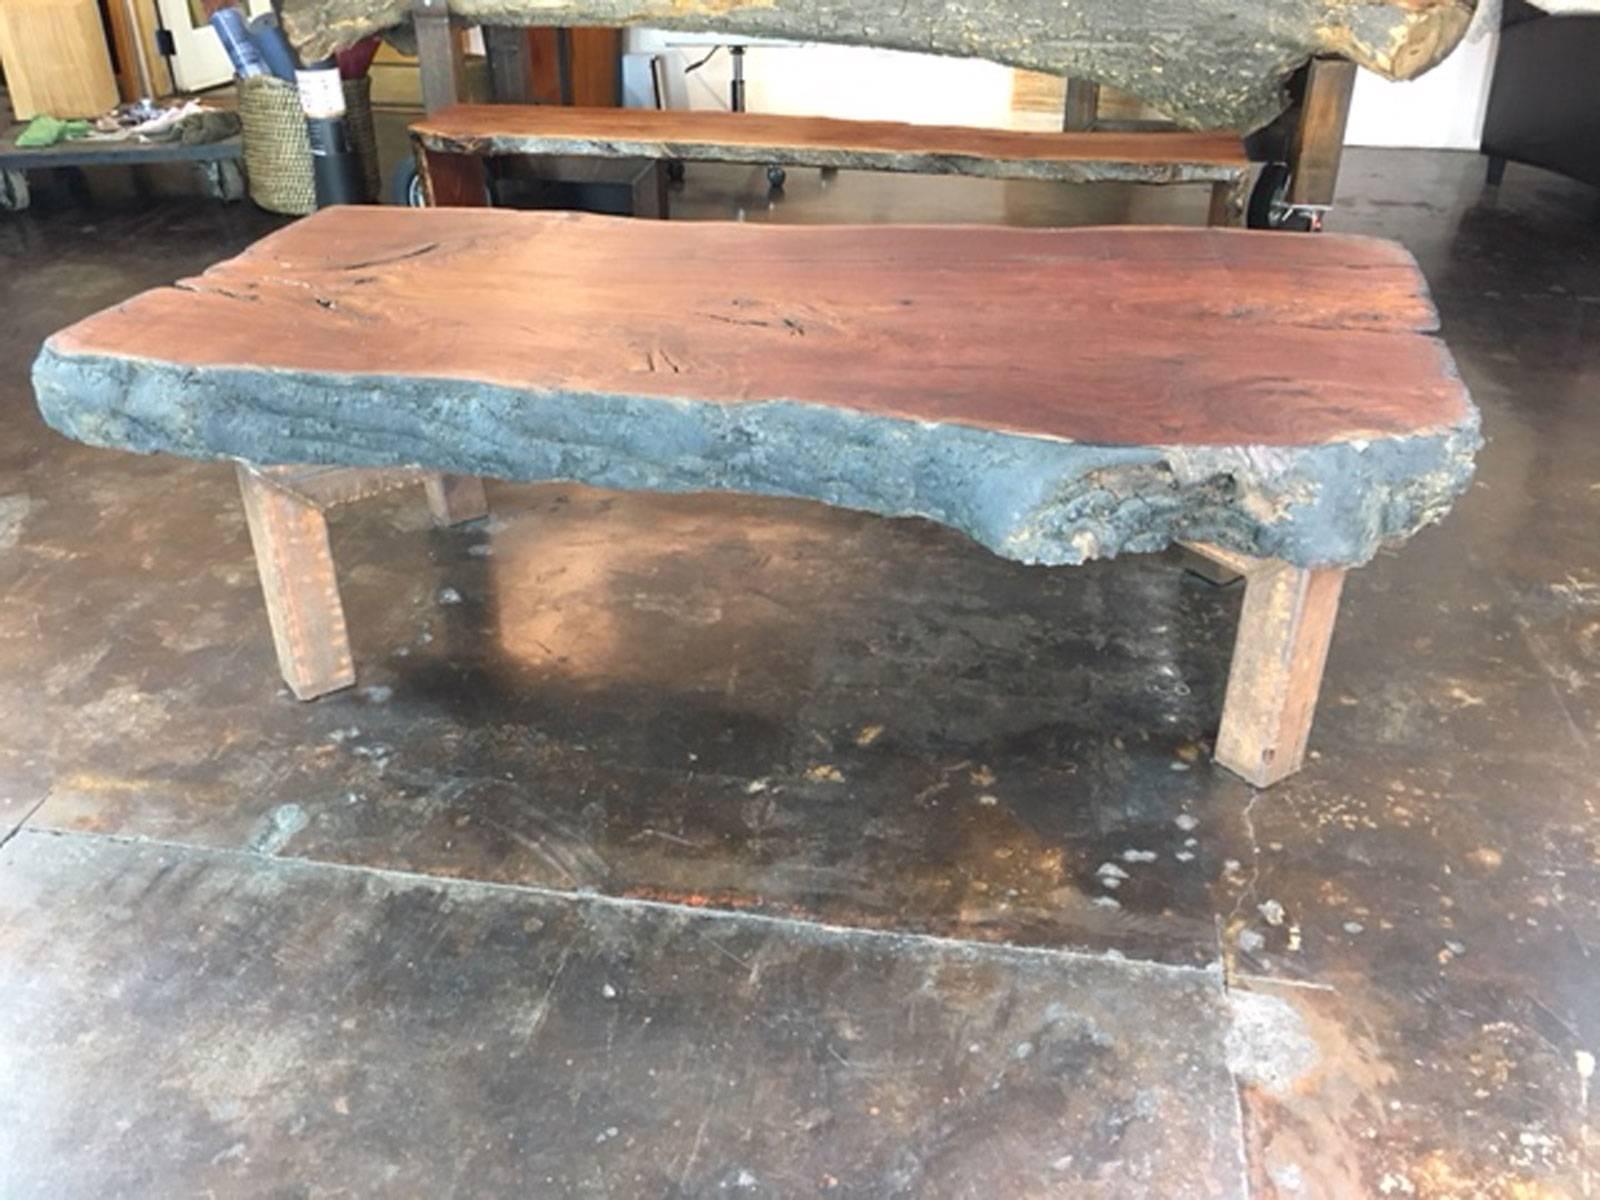 Huge Coffee Table or Display Table in Eucalyptus Wood In Excellent Condition For Sale In Phoenix, AZ